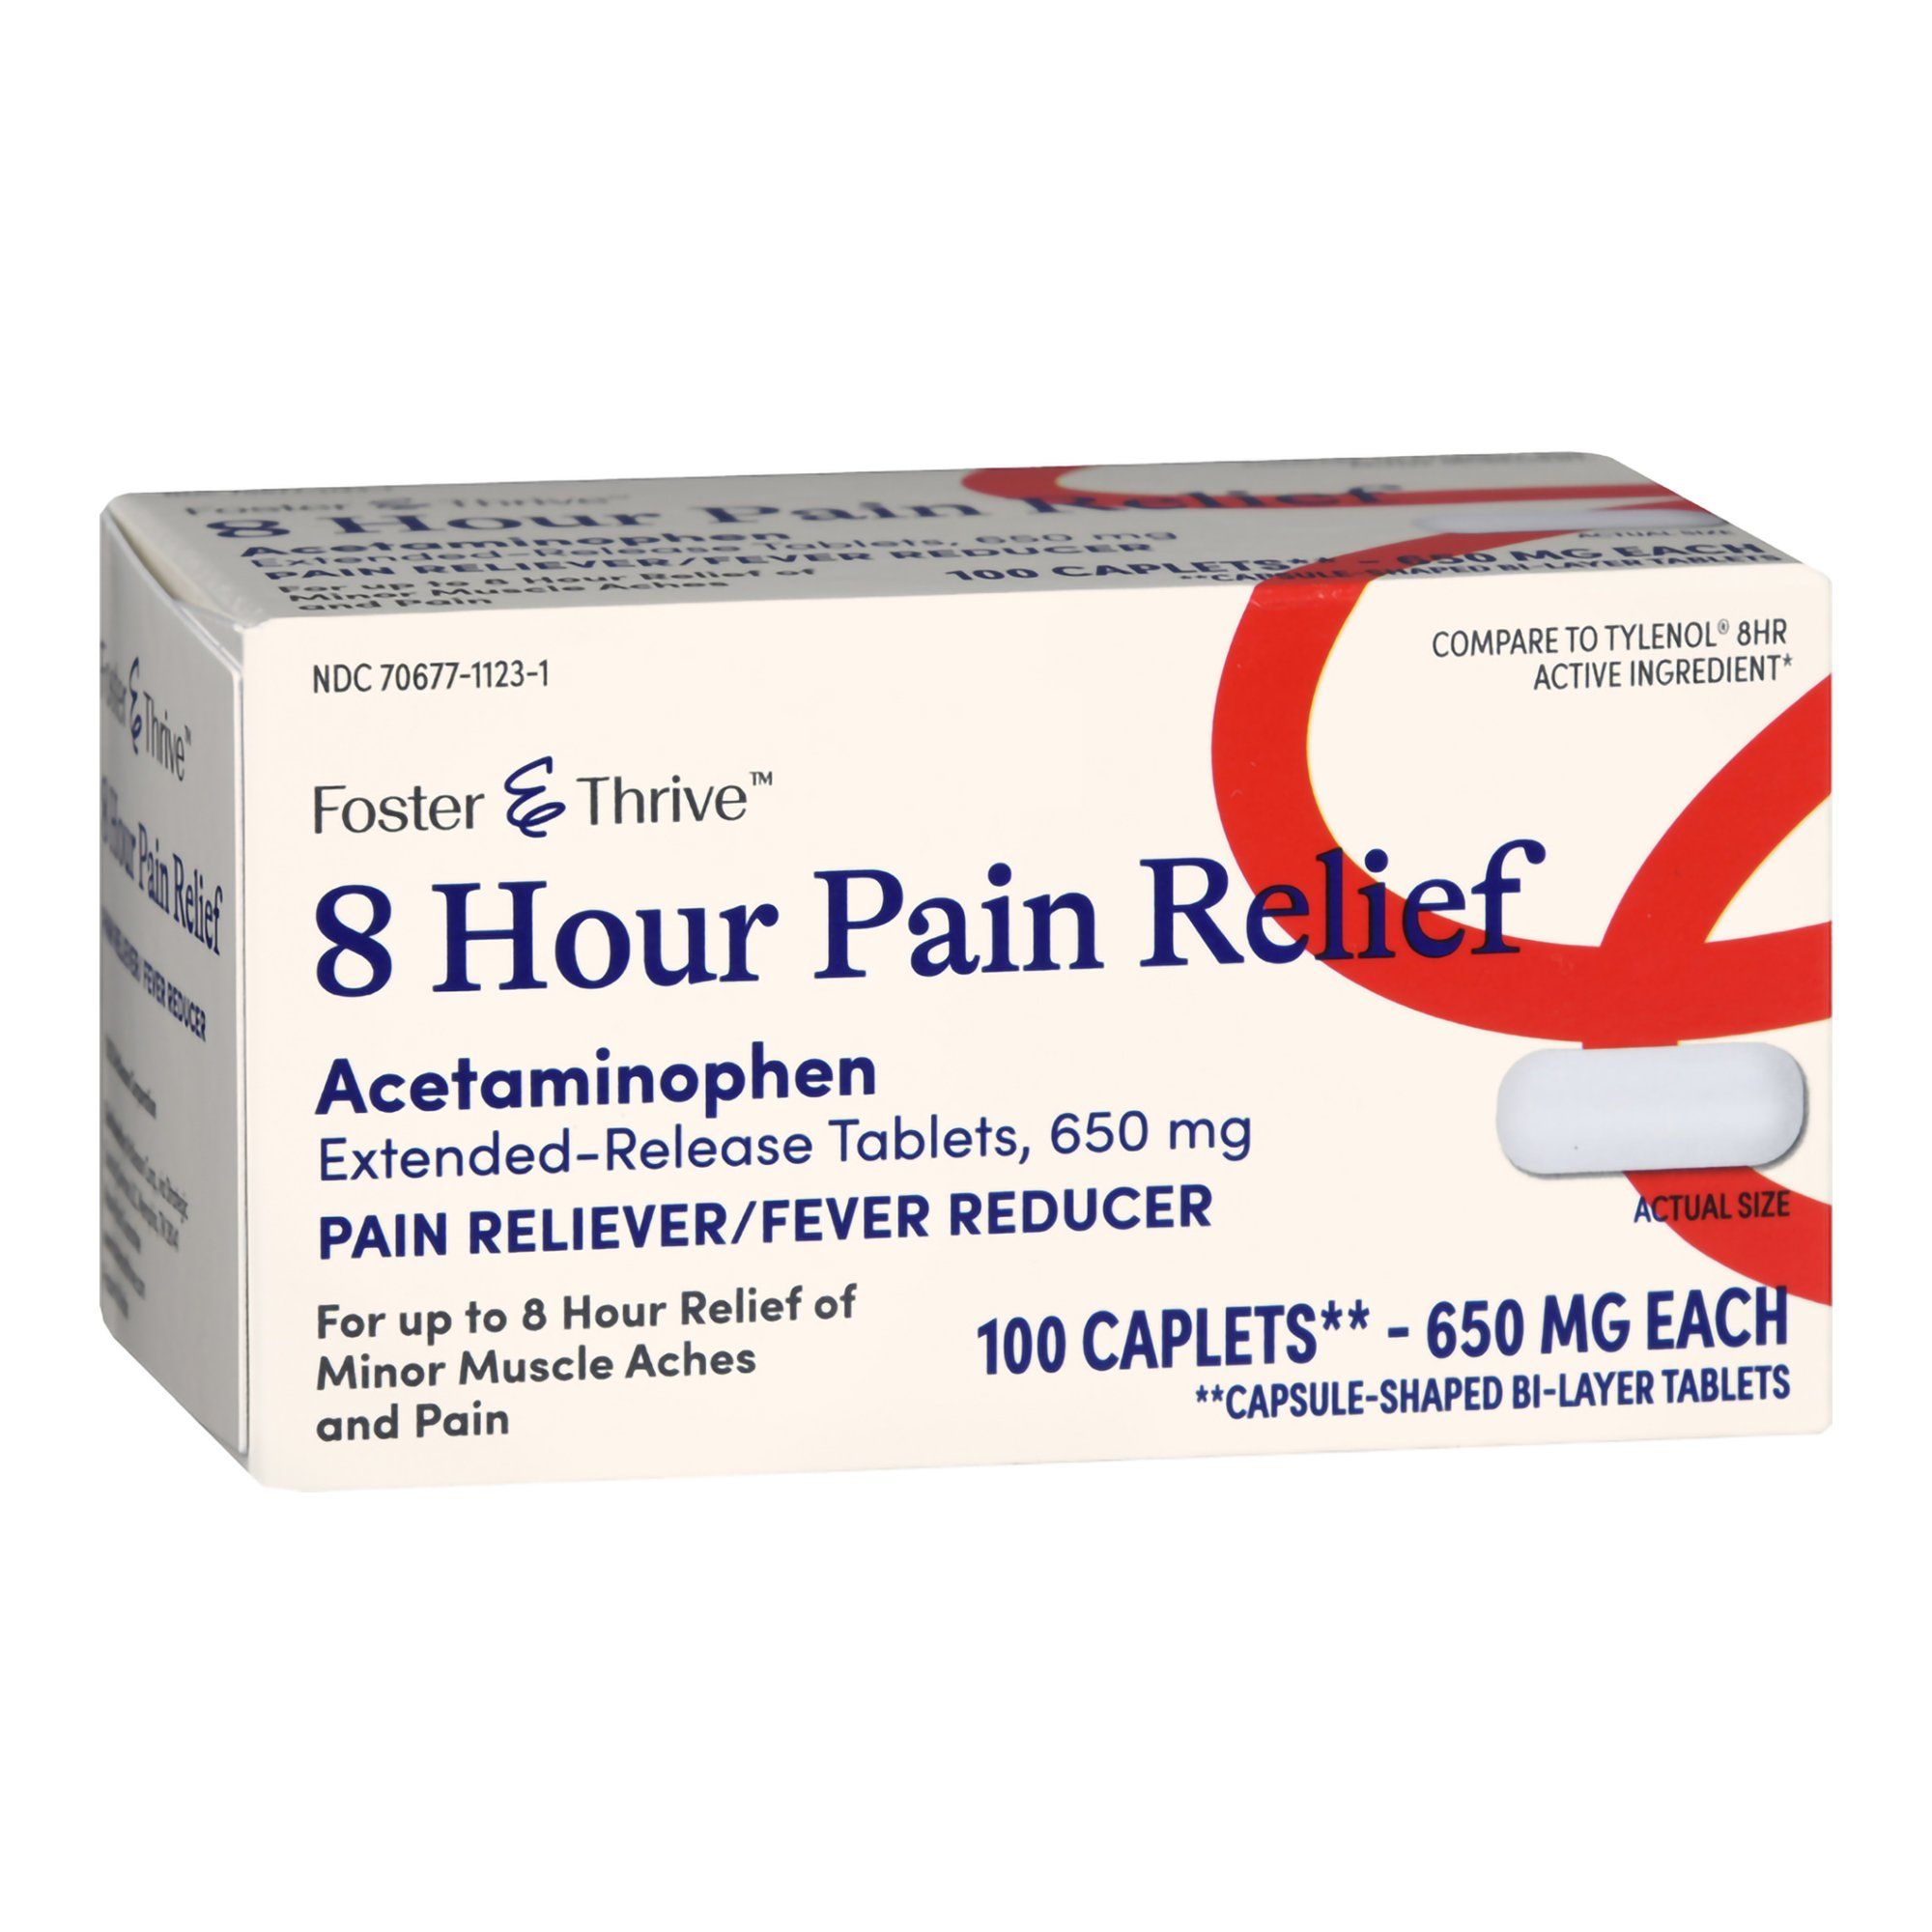 Foster & Thrive 8 Hour Pain Relief Acetaminophen Caplets,  650 mg -  100 ct